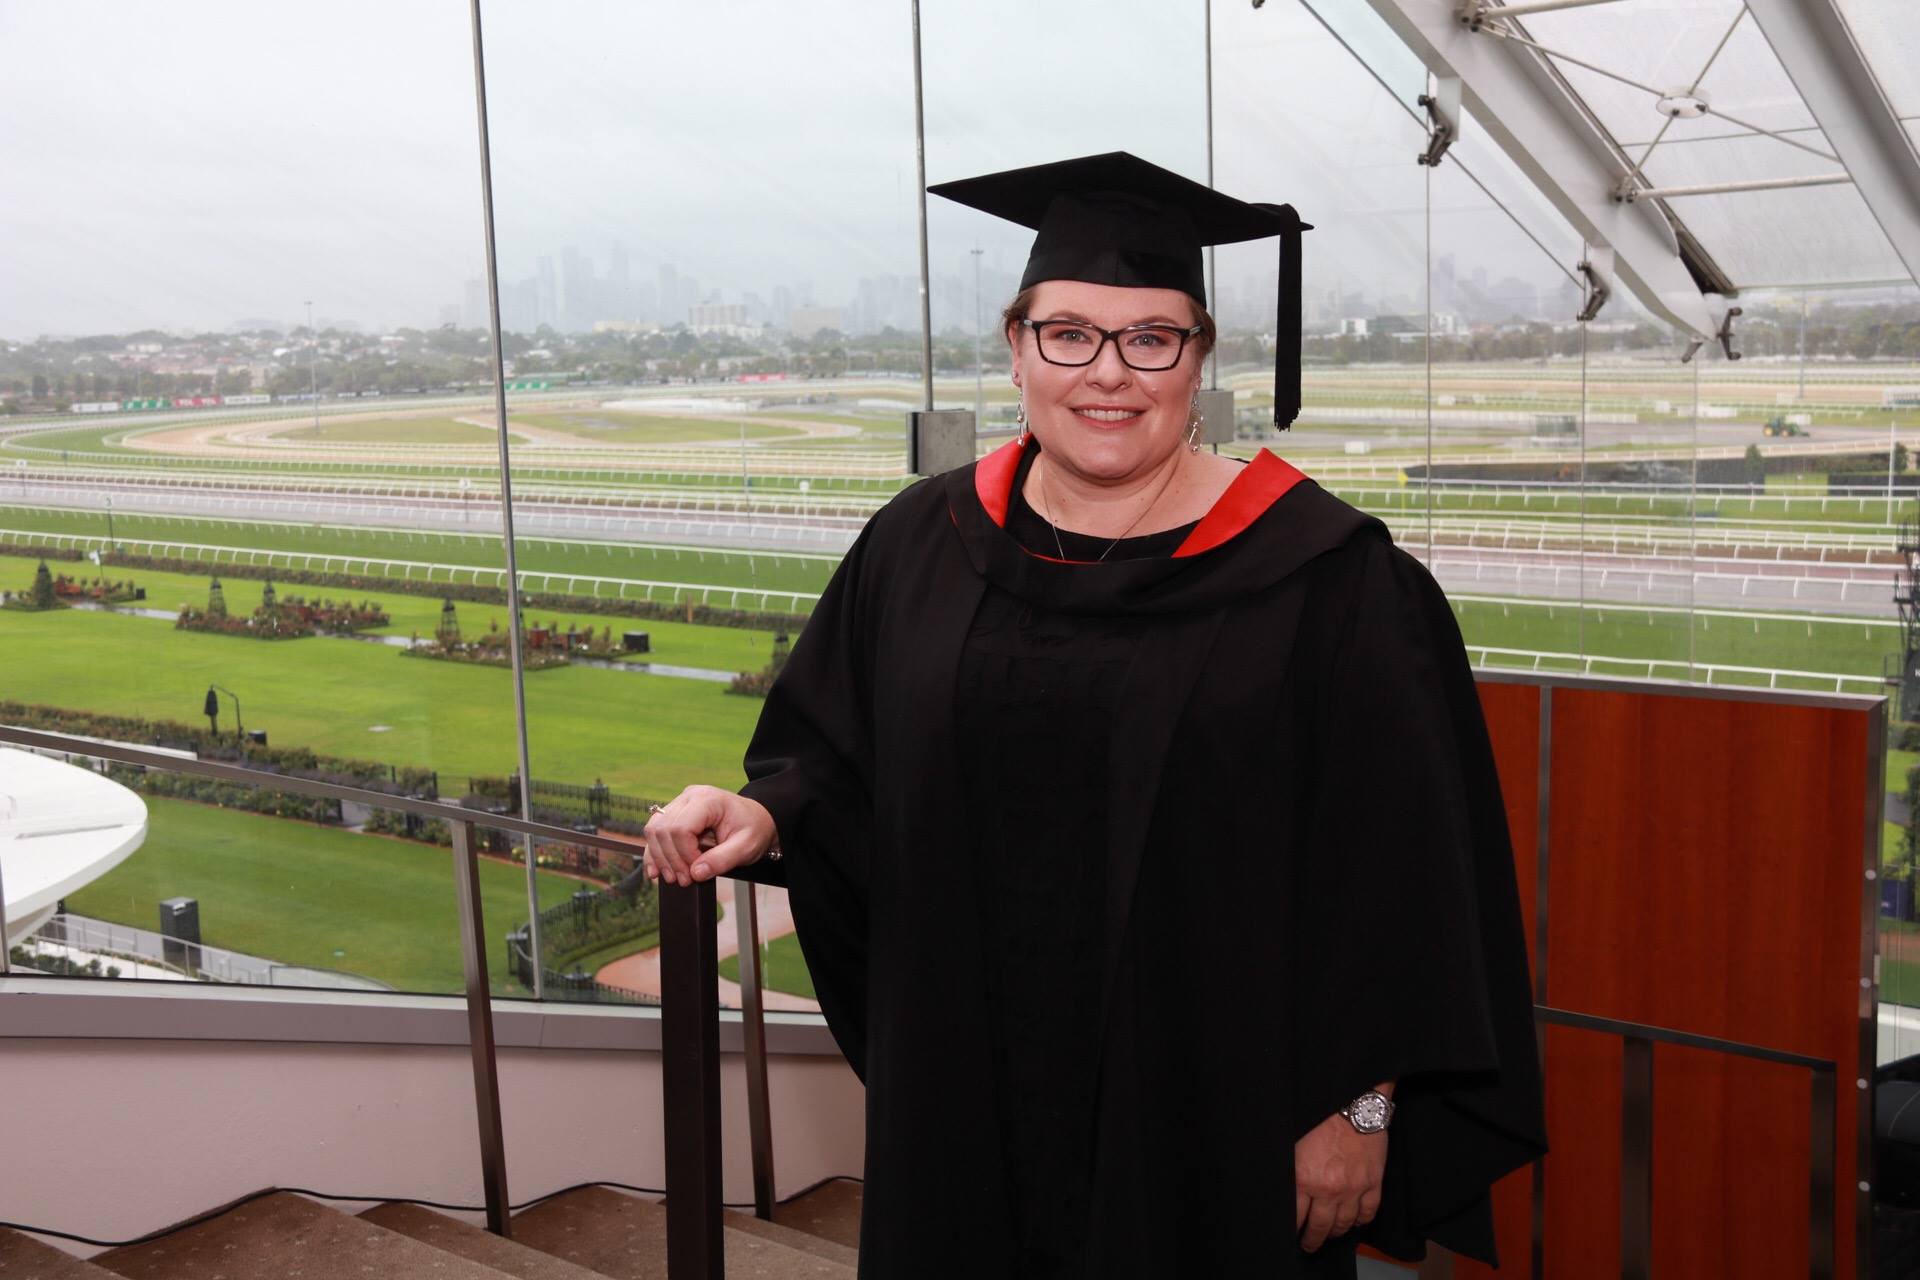 Bachelor of Education graduate posing before the ceremony at Flemington Racecourse